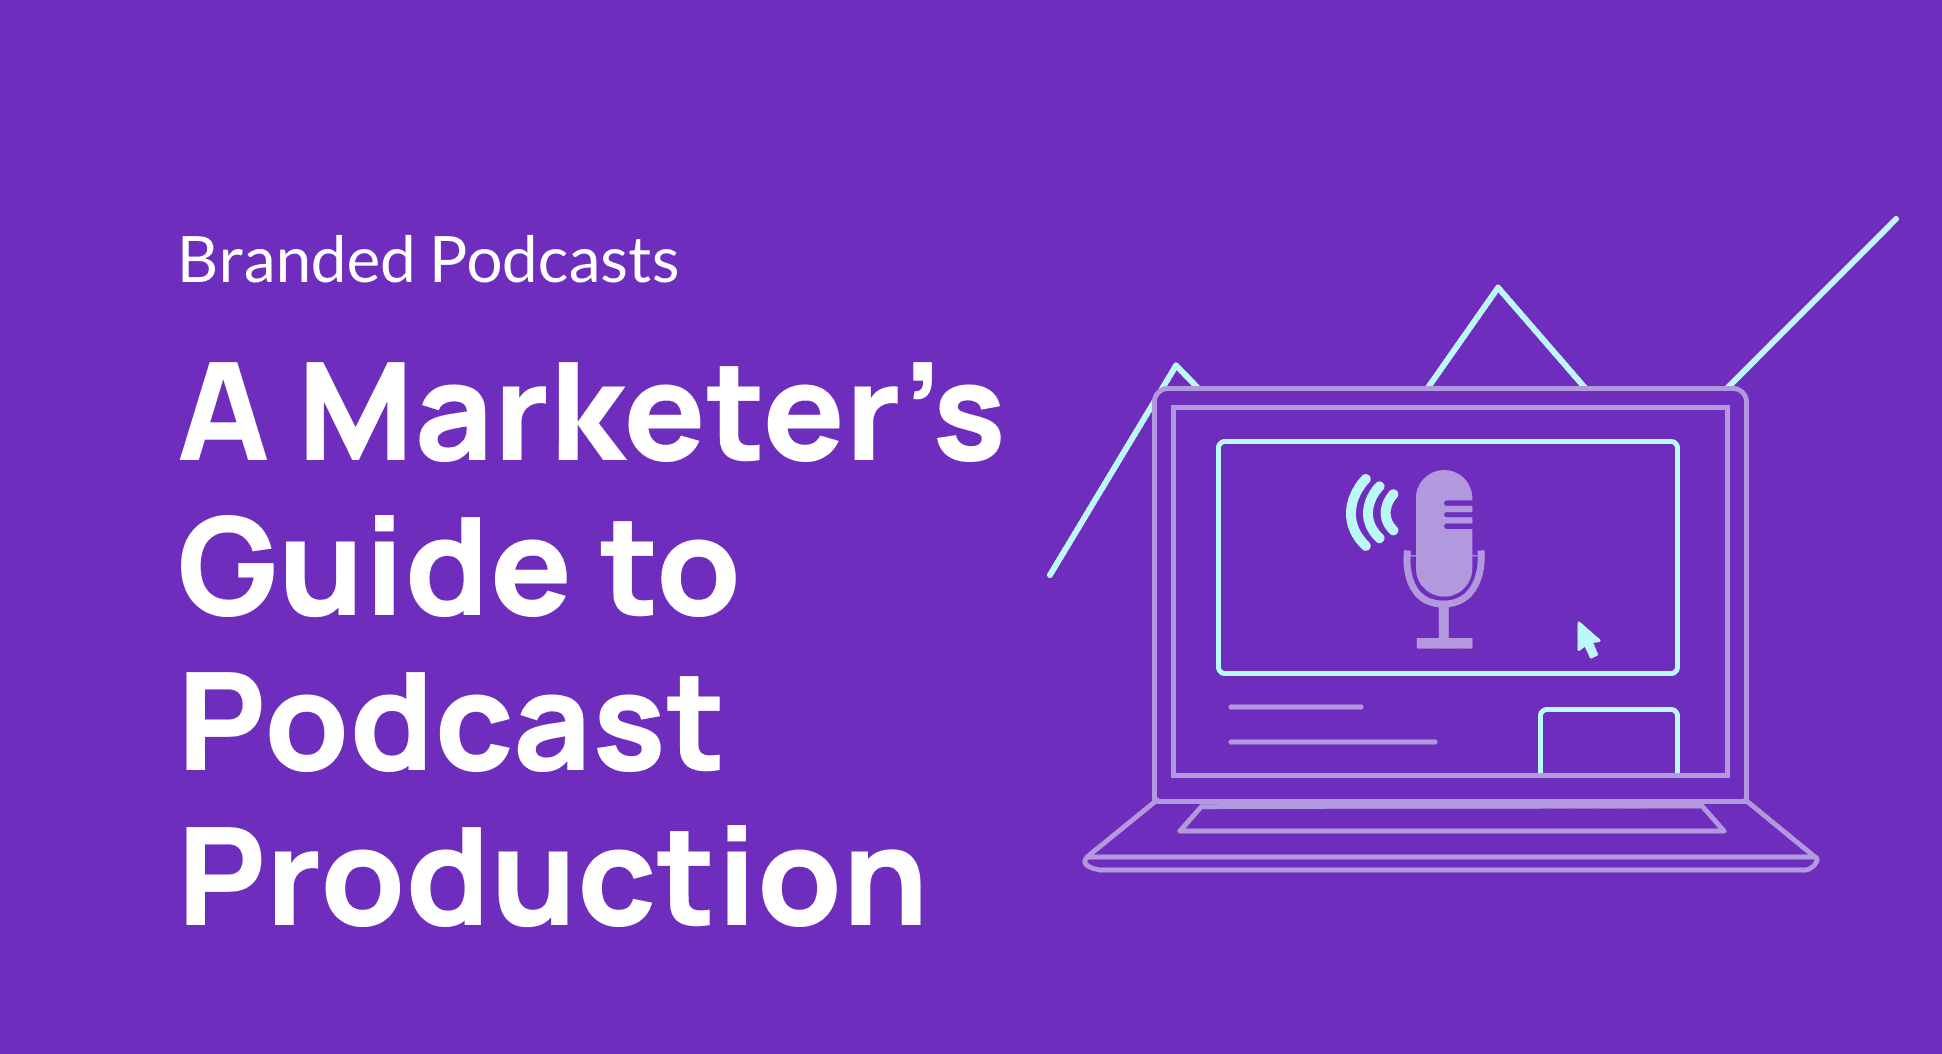 Product A Marketer’s Guide to Podcast Production image